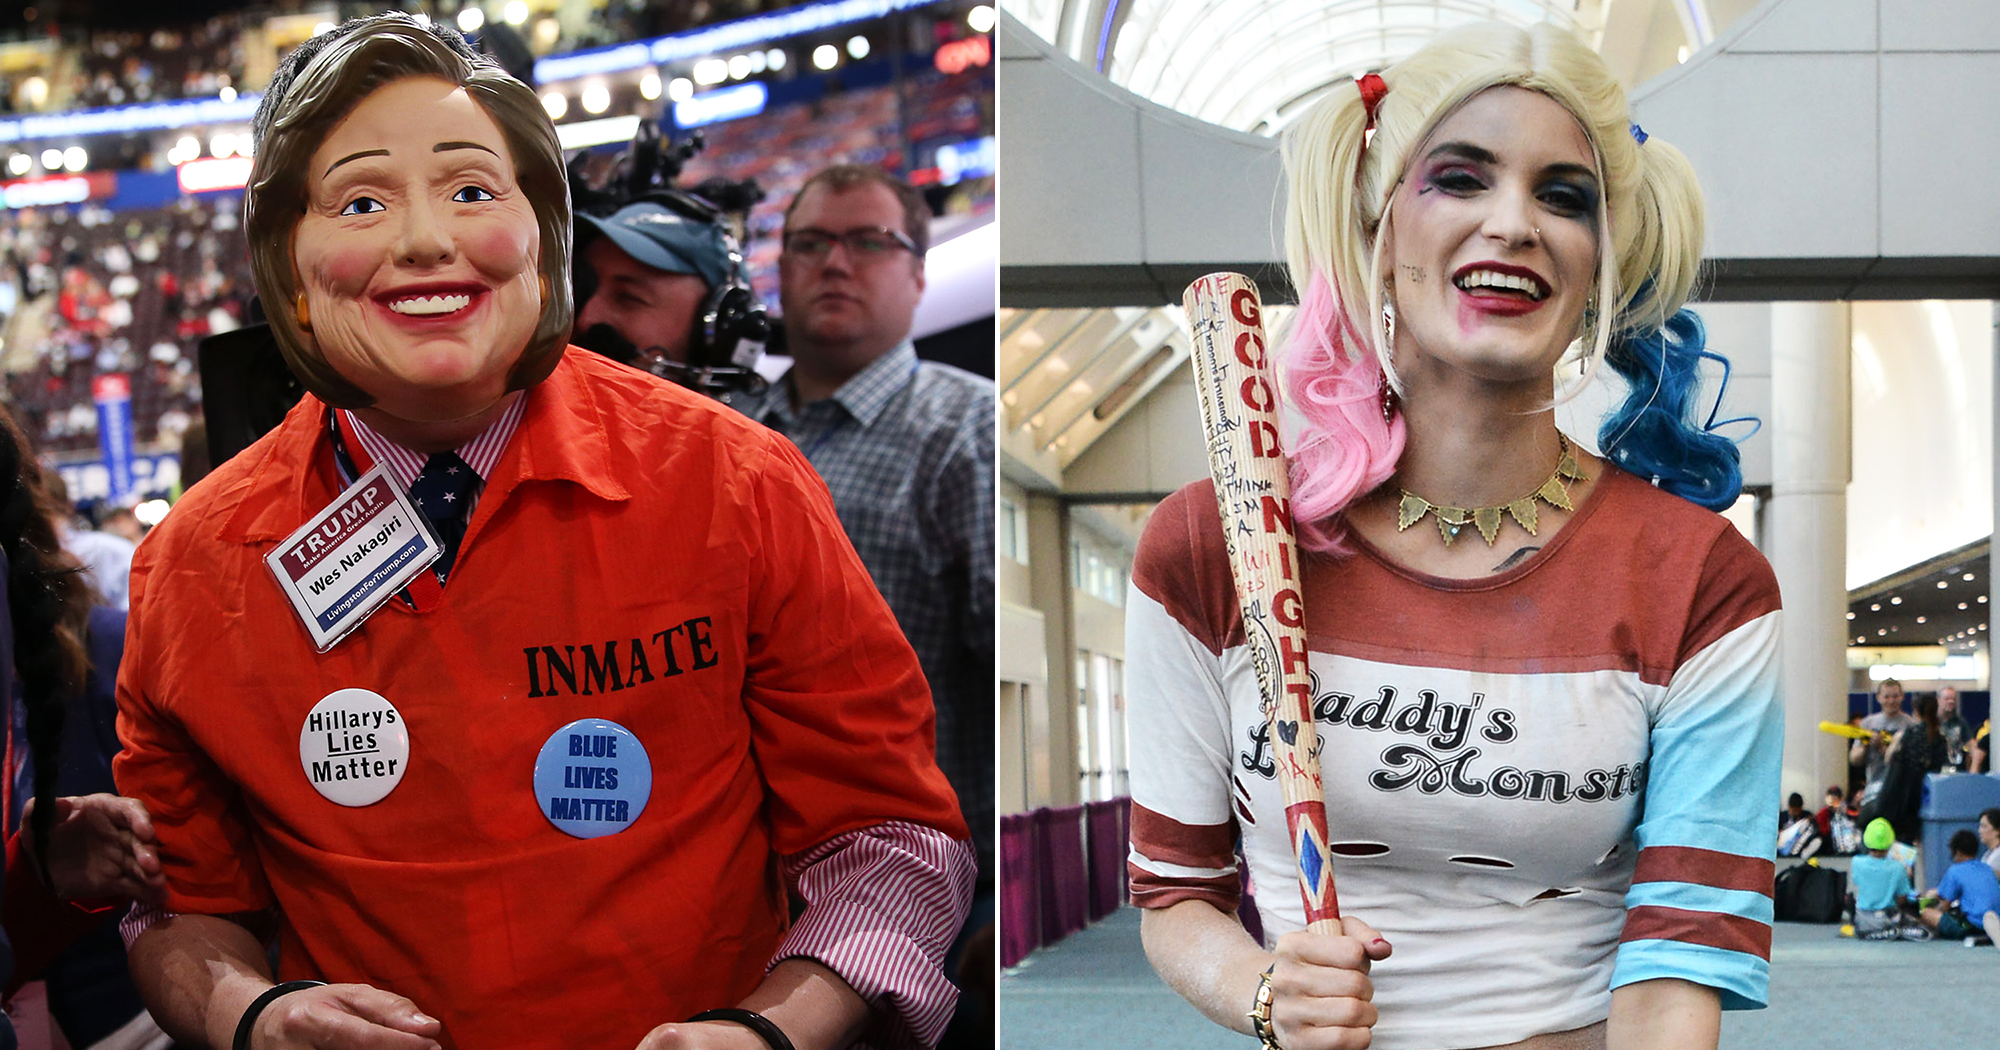 Attendees at the RNC, left, and at Comic-Con, right.